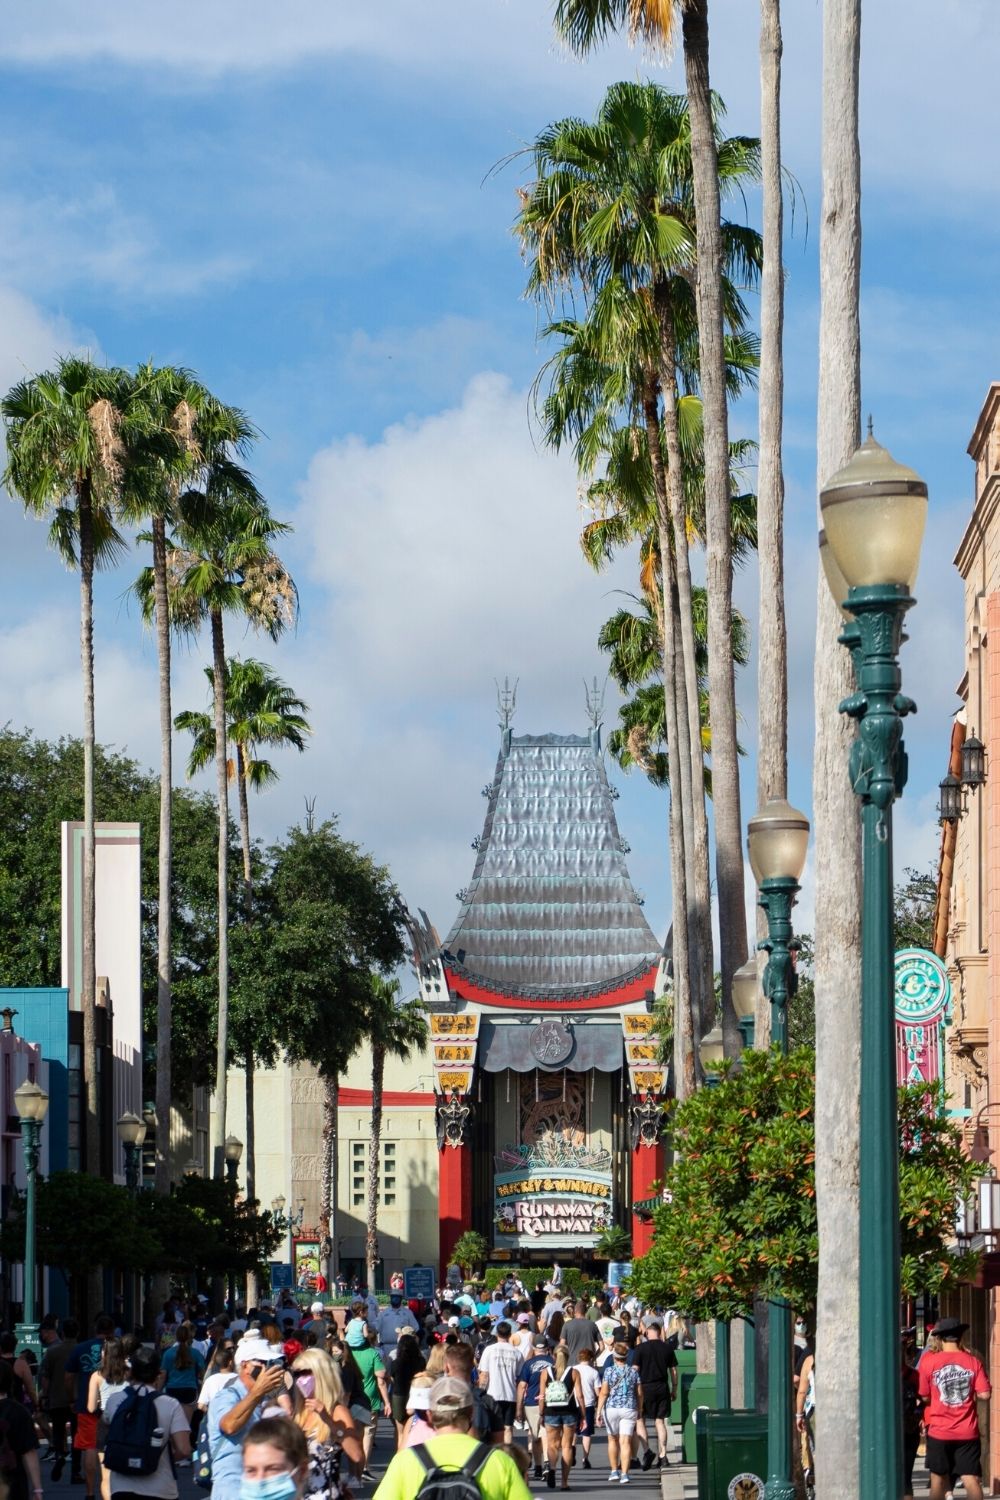 Hollywood Studios' Chinese Theater at Disney World